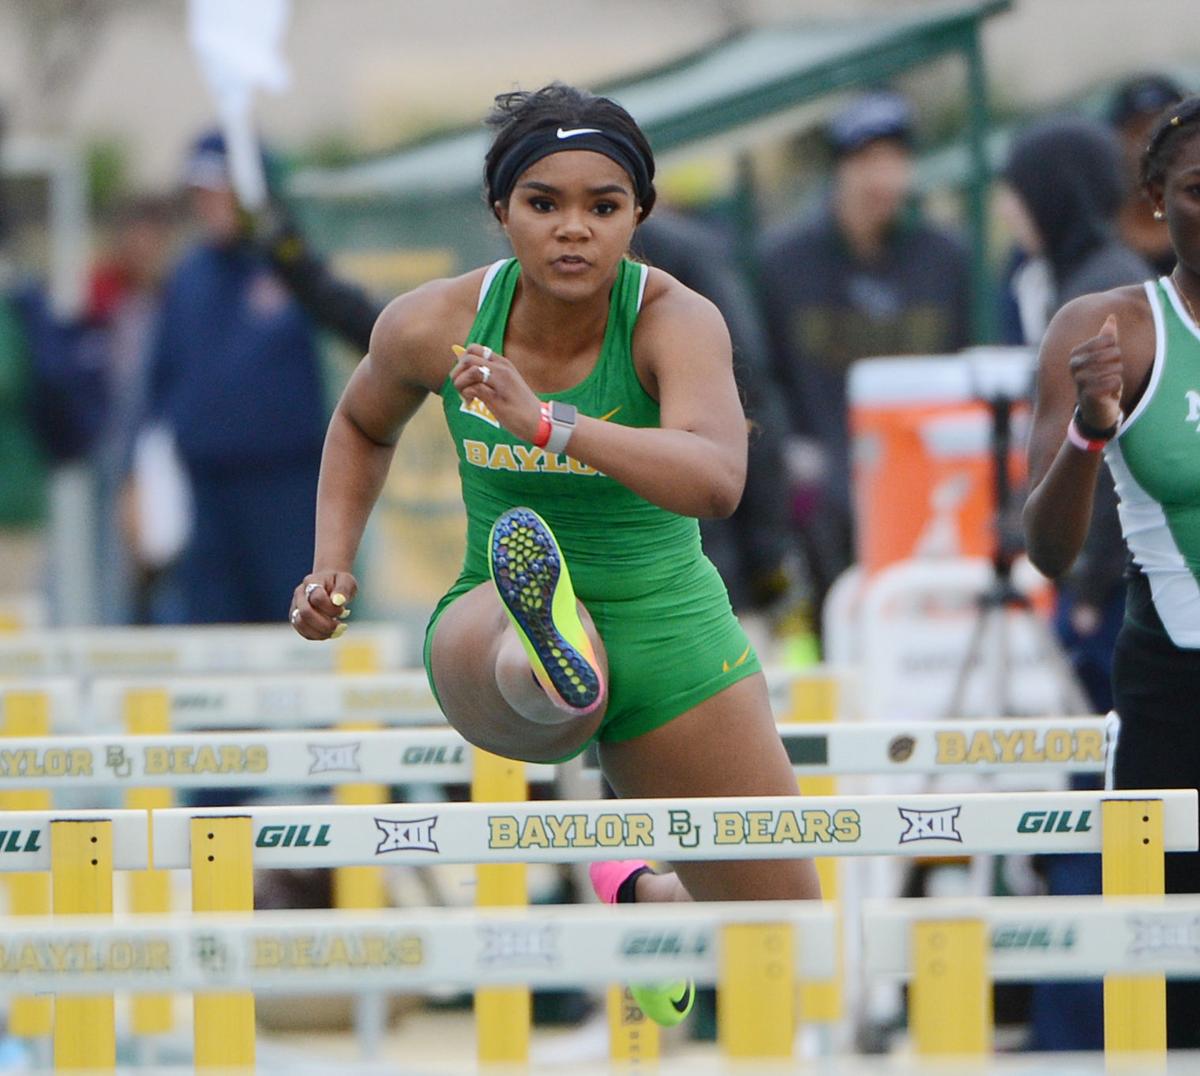 Baylor track has good showing in less than ideal conditions | Baylor